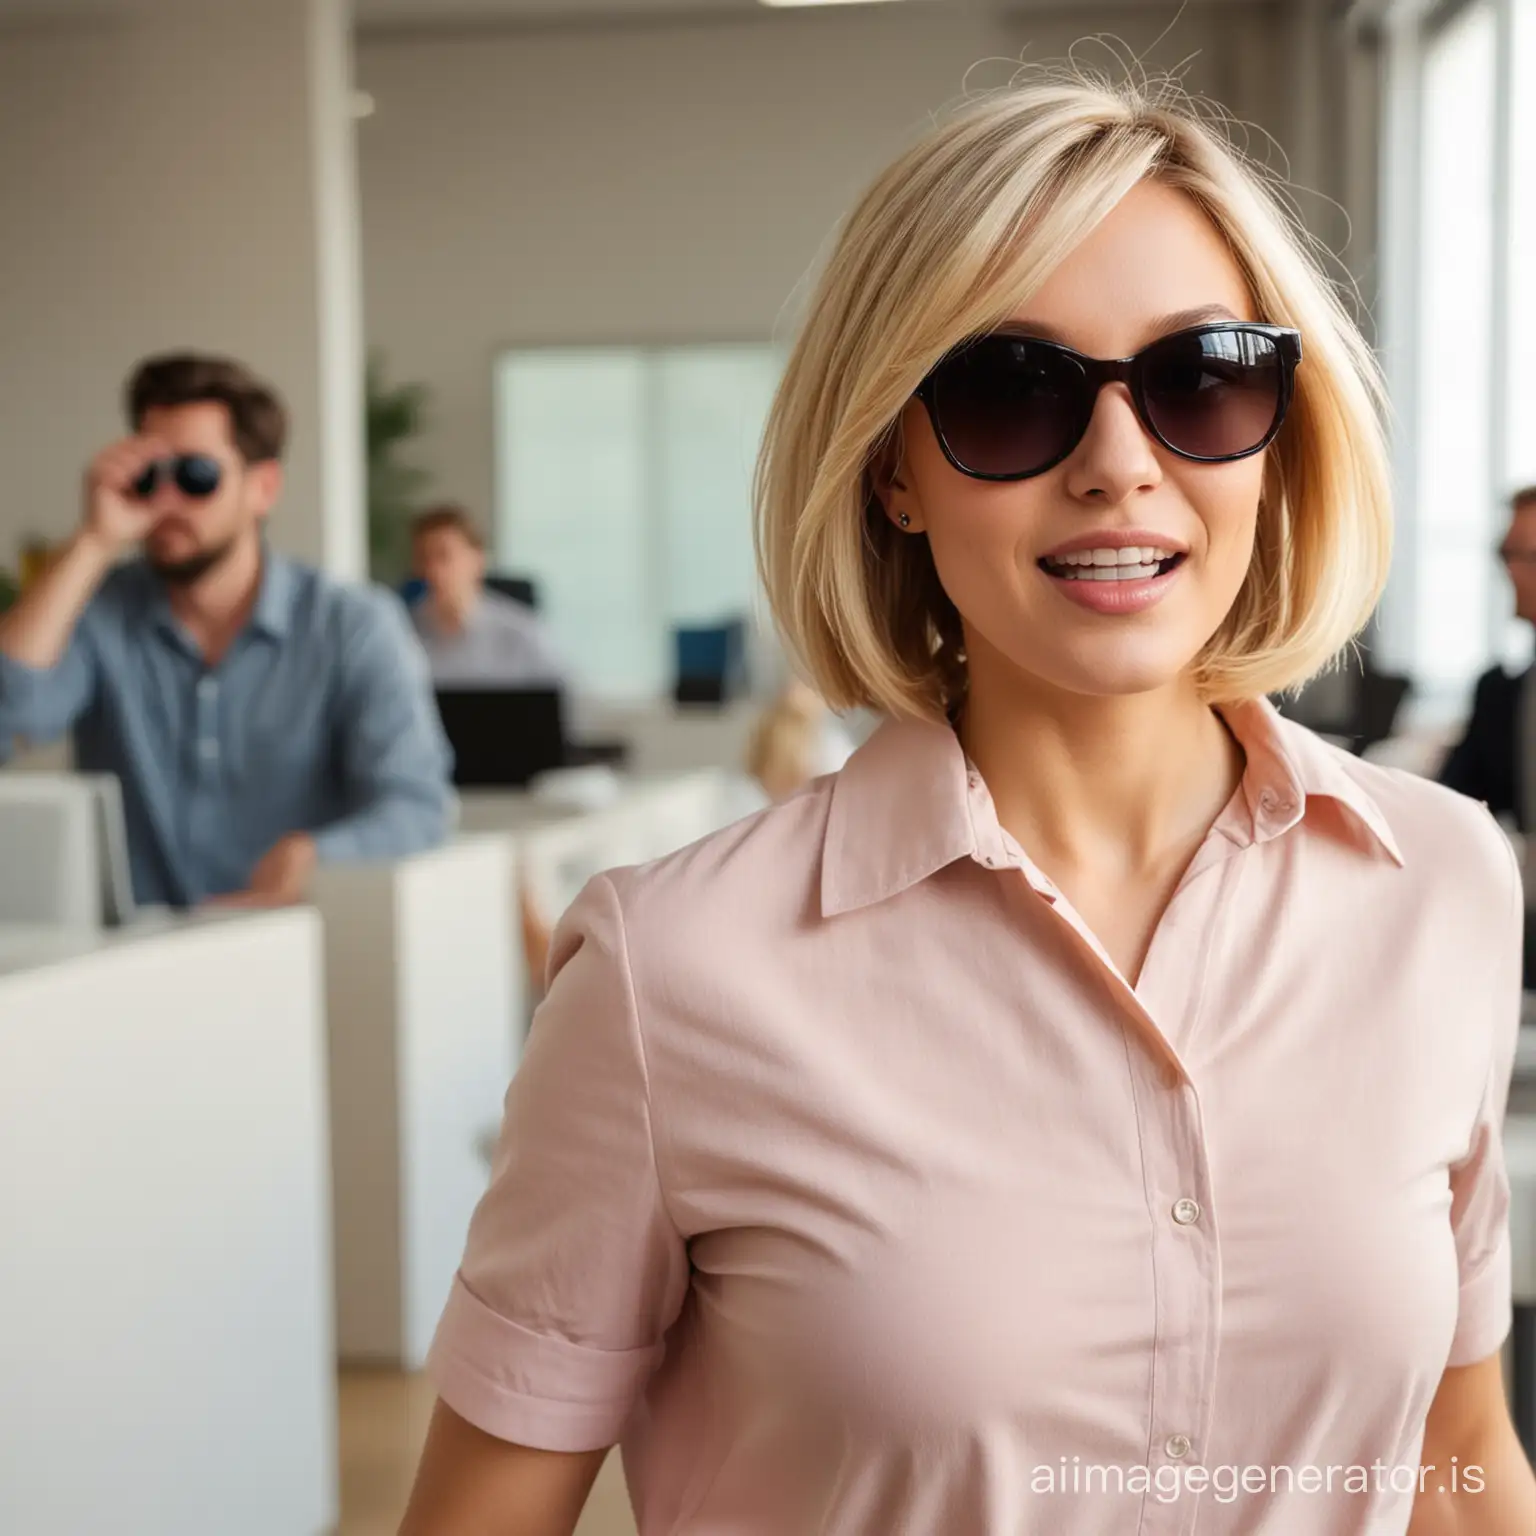 Blonde-BobCut-Woman-in-Sunglasses-Evading-Paparazzi-at-Office-Exit